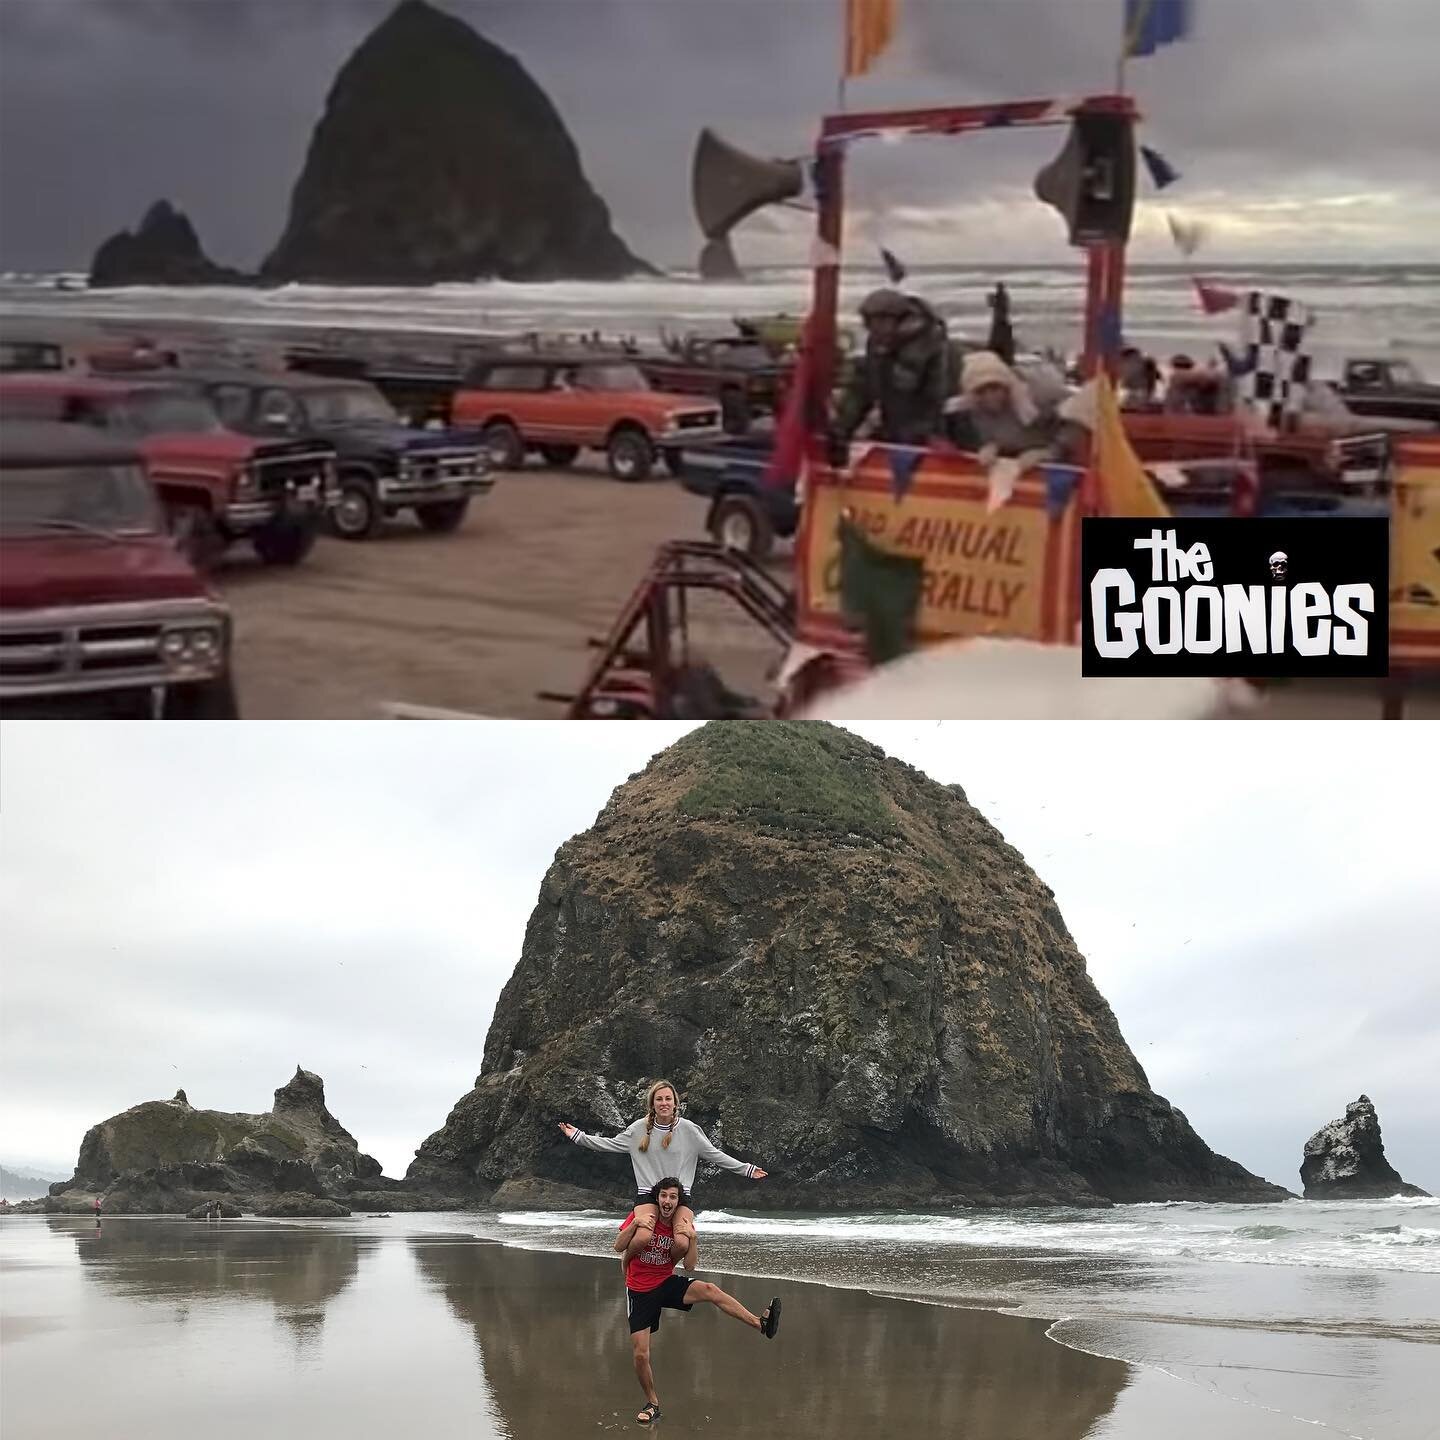 Fun fact: The mayor of Astoria, OR (where the film was shot) declared June 7th &ldquo;Goonies Day&rdquo;.